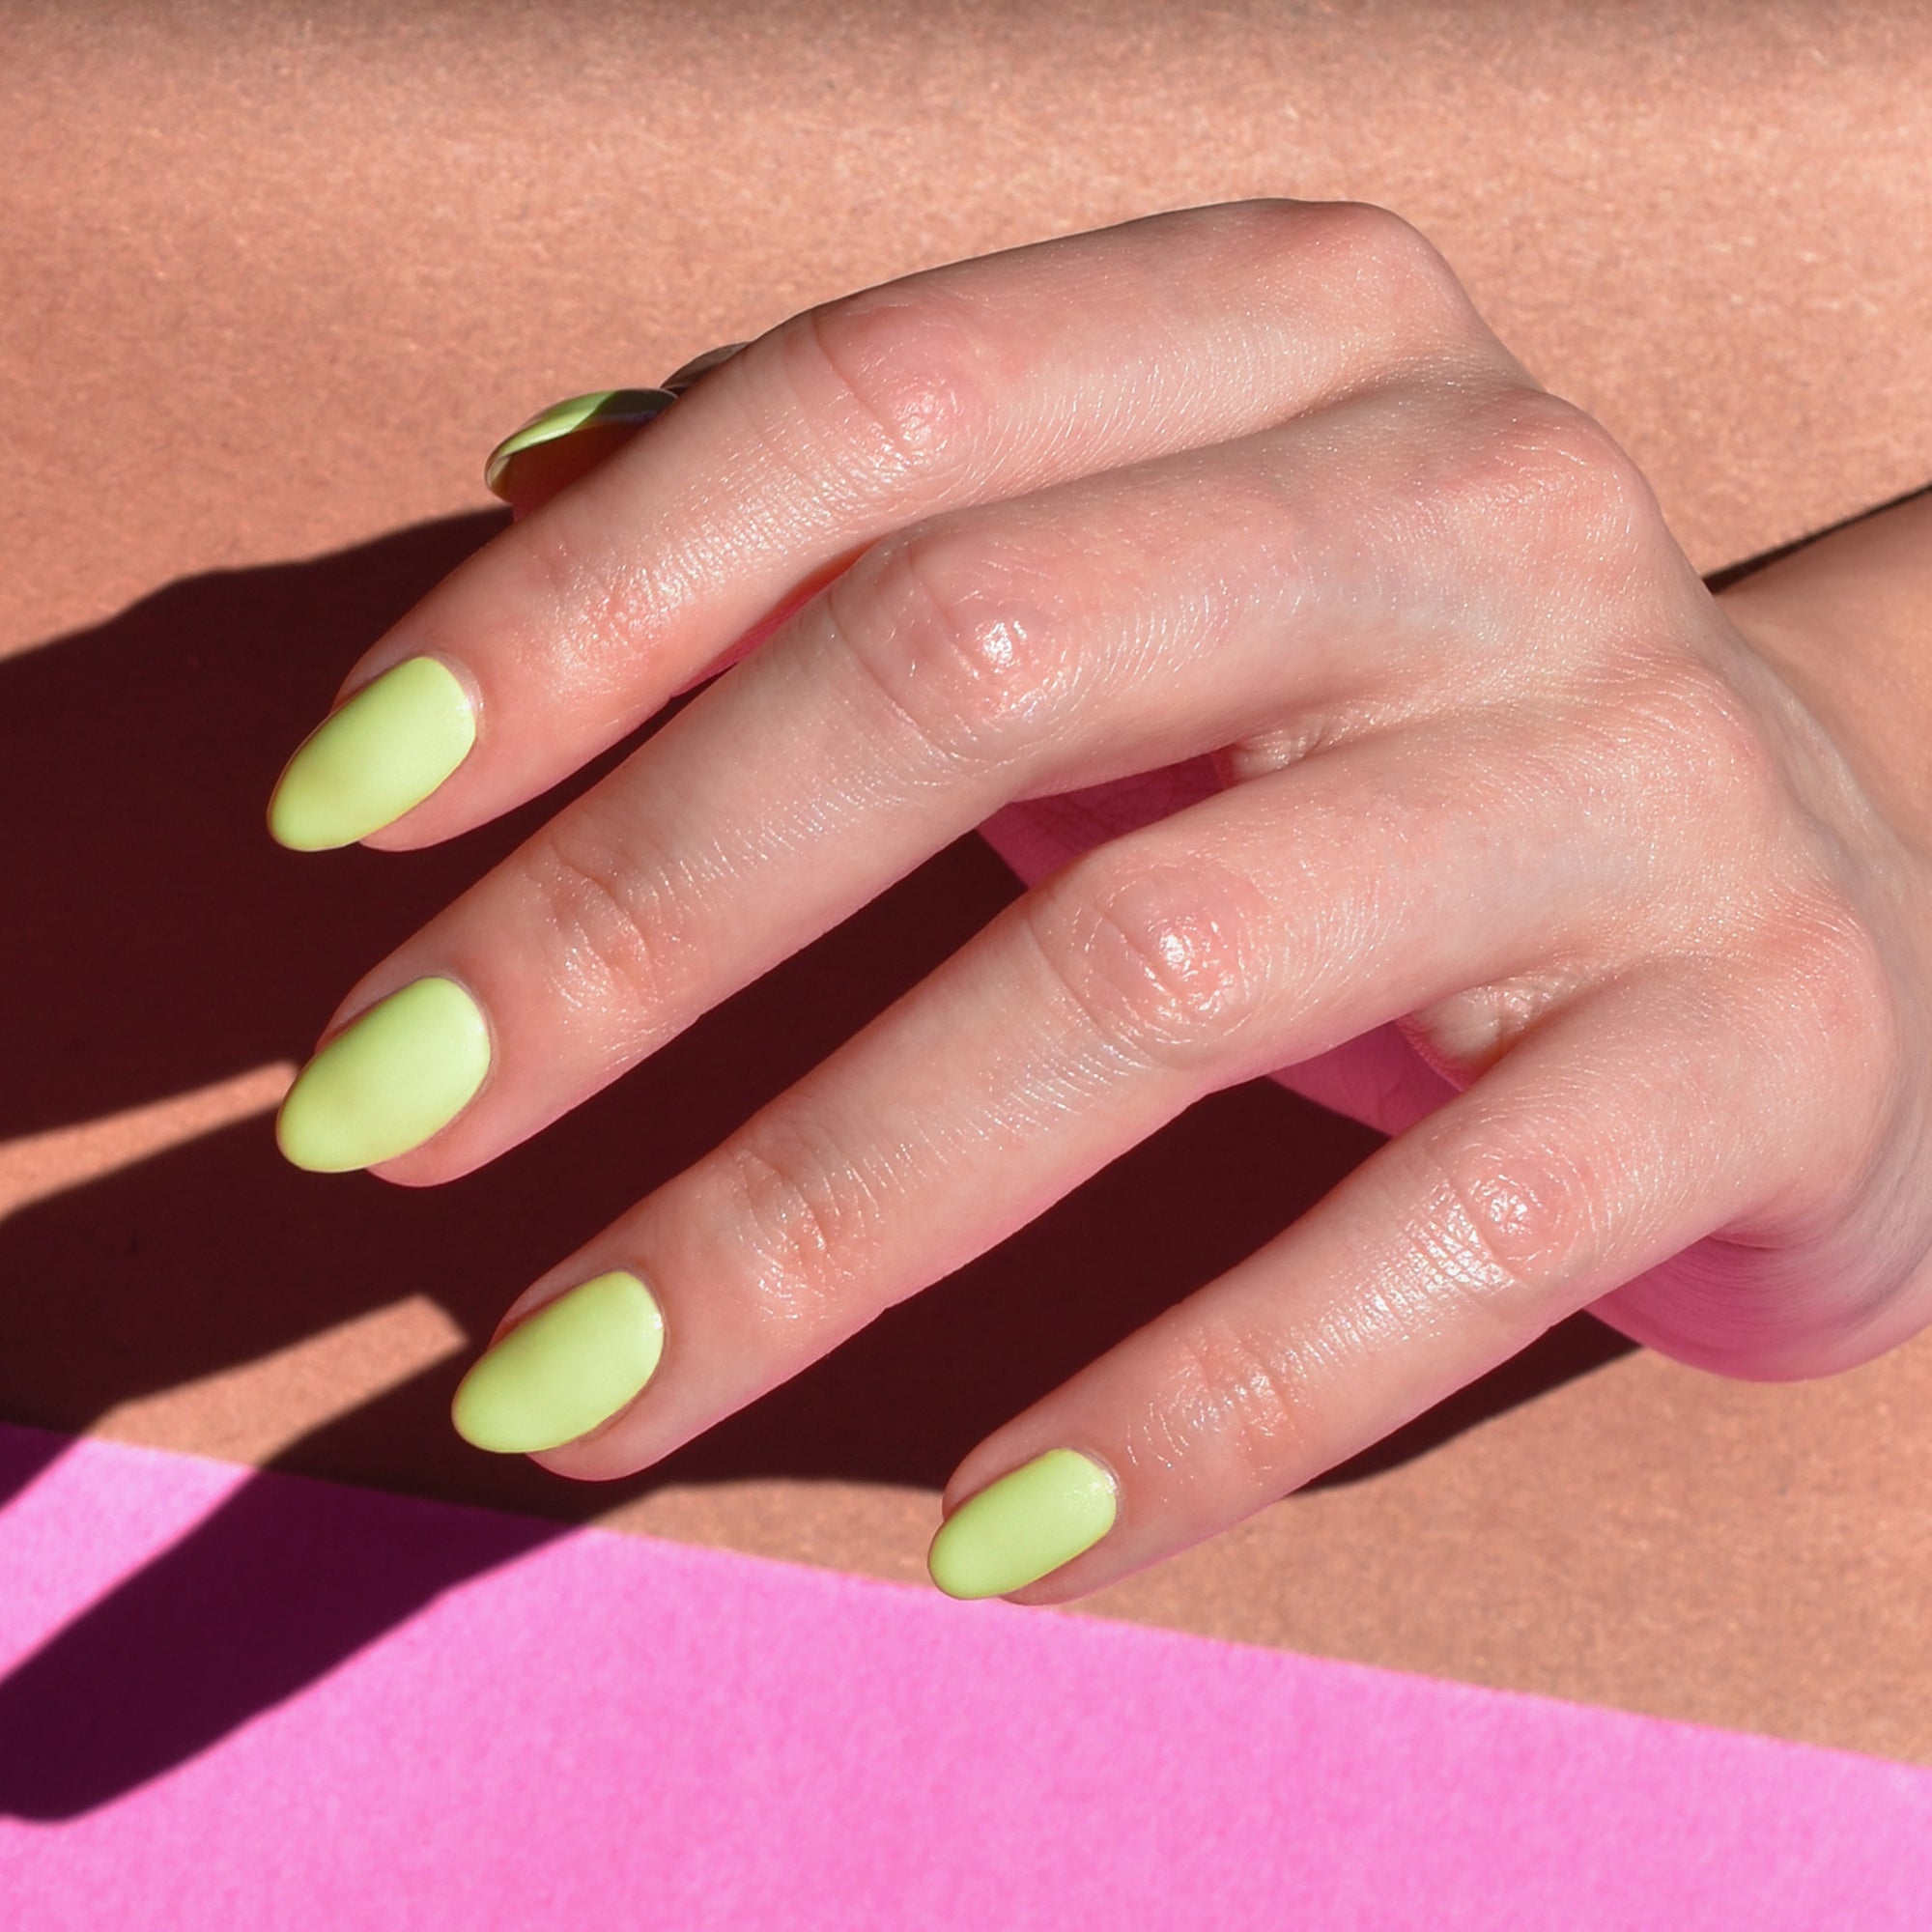 A light toned hand is featured up close with Good Migrations nail polish from Hello Birdie painted on the nails in a light lime green hue. The hand is brightly lit against a tan and pink paper background.